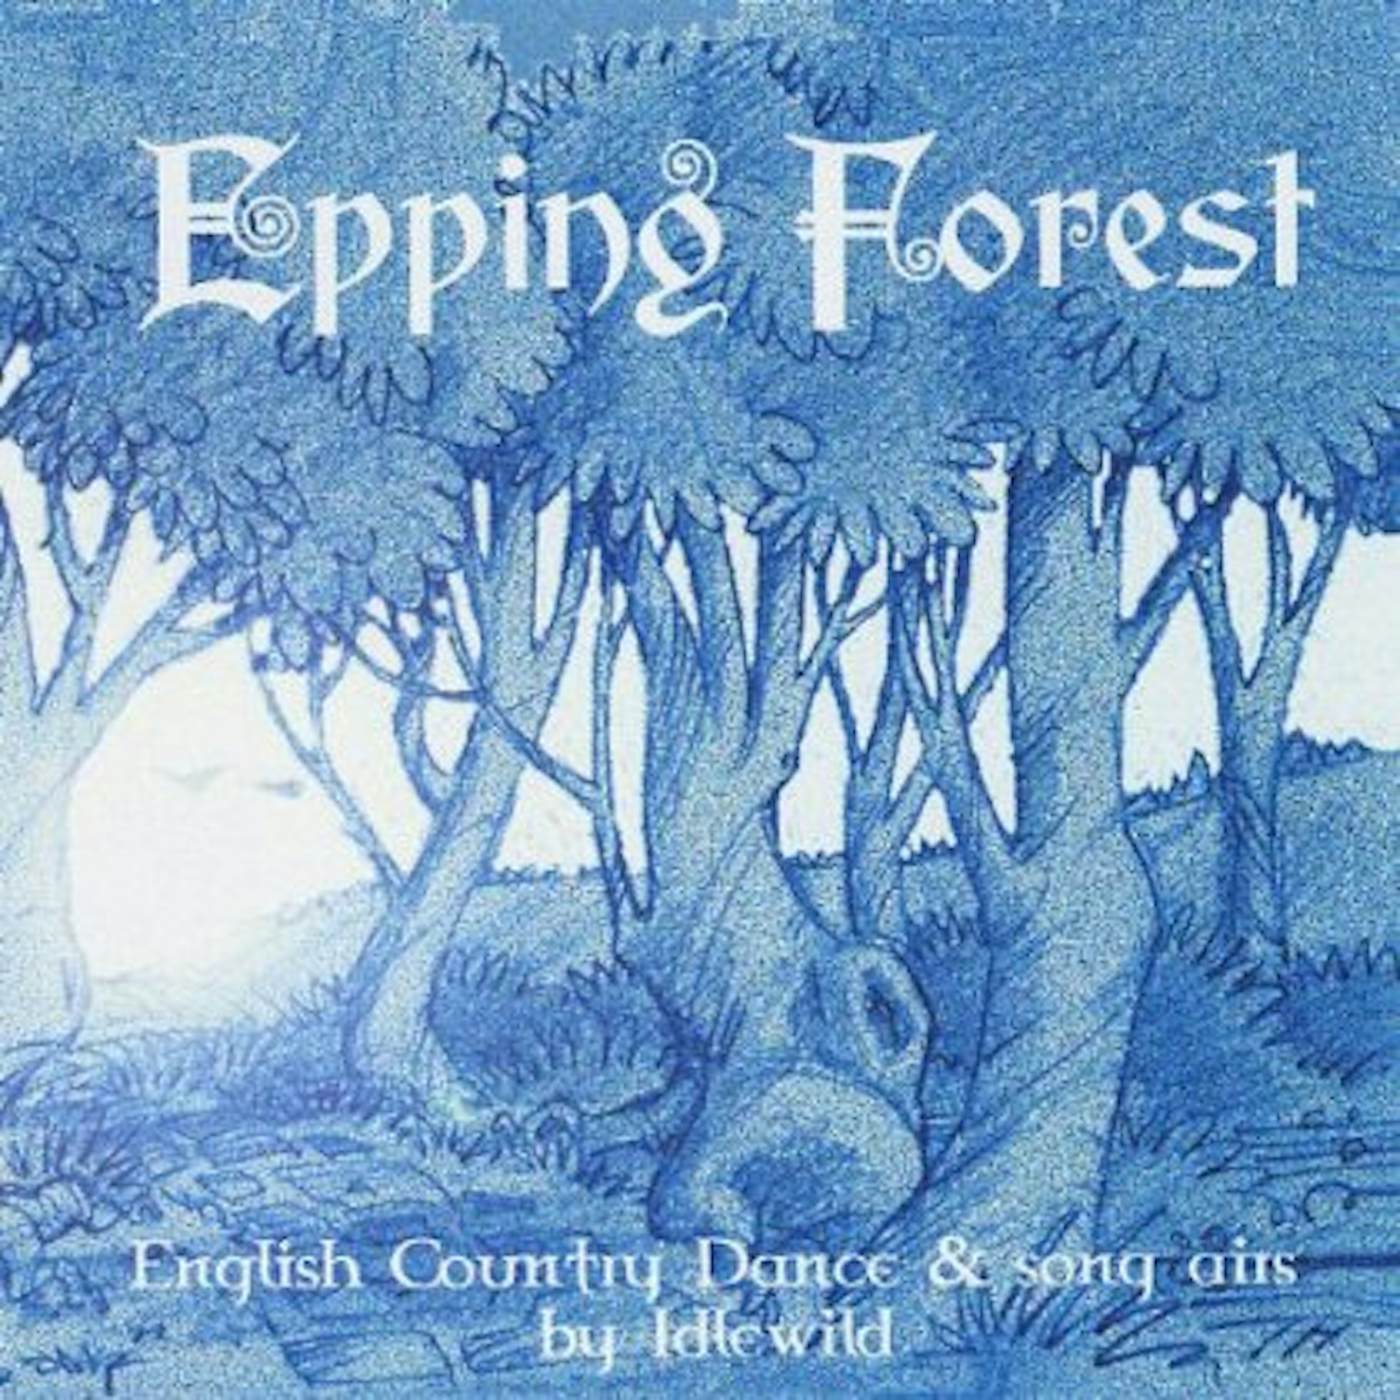 Idlewild EPPING FOREST CD